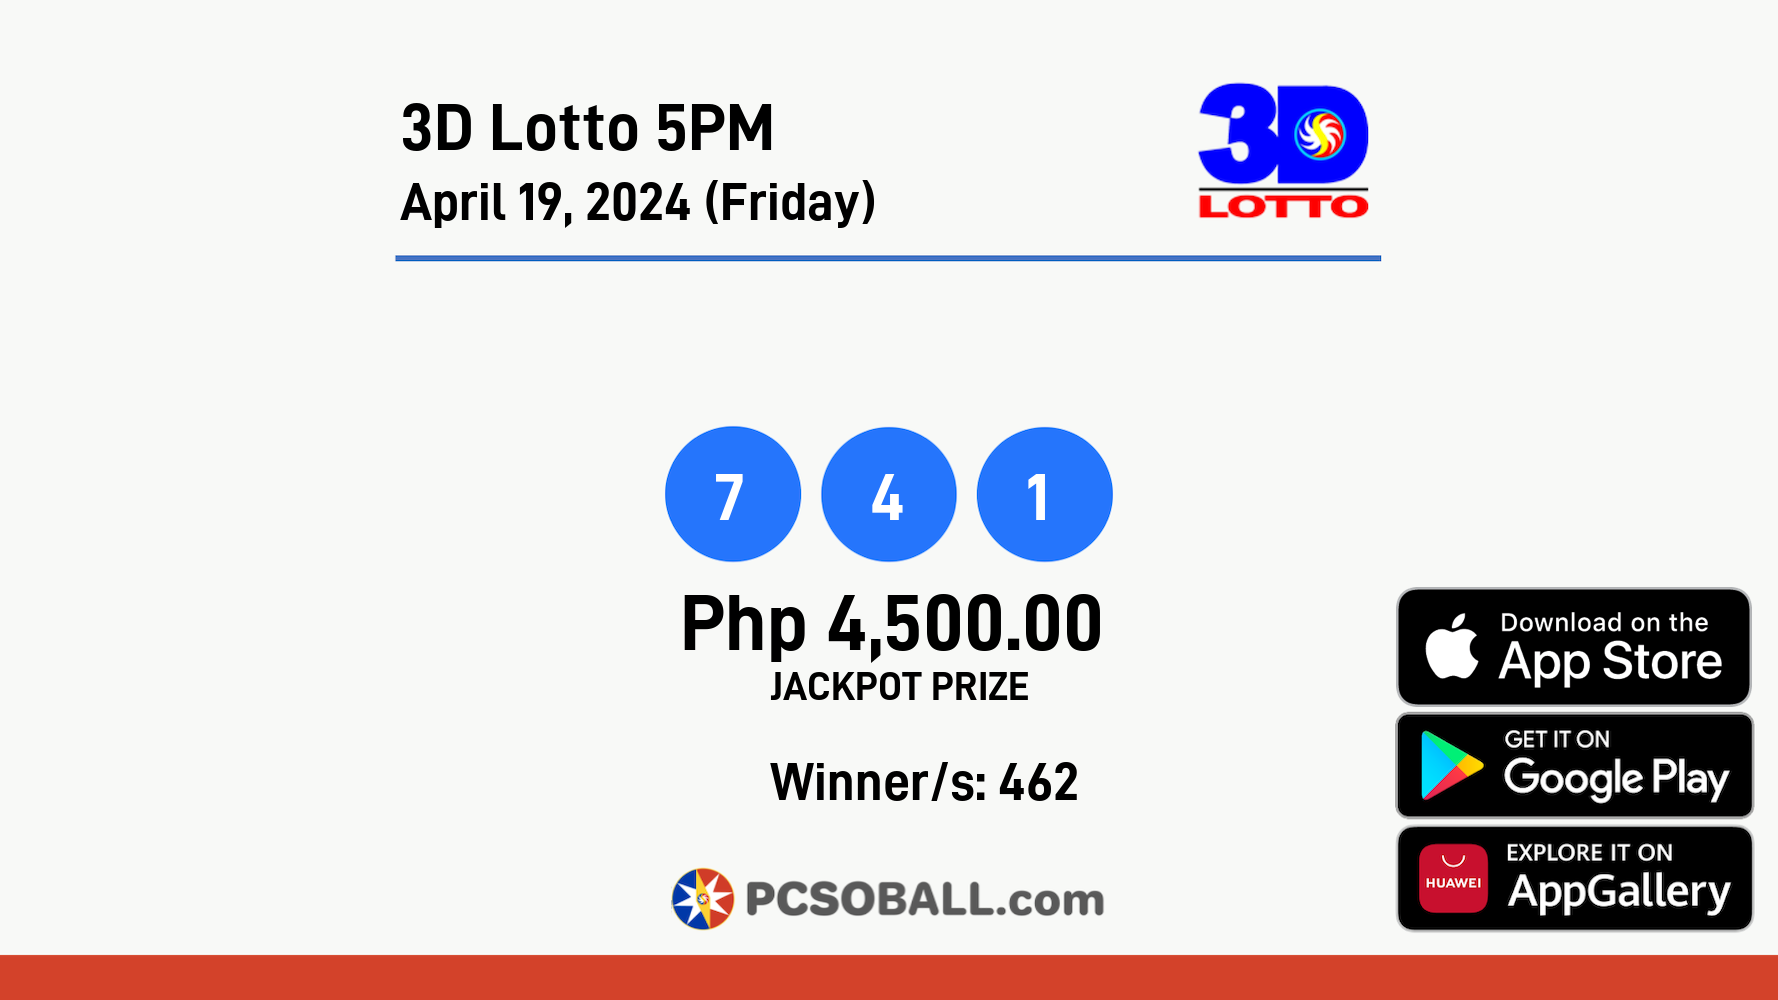 3D Lotto 5PM April 19, 2024 (Friday) Result